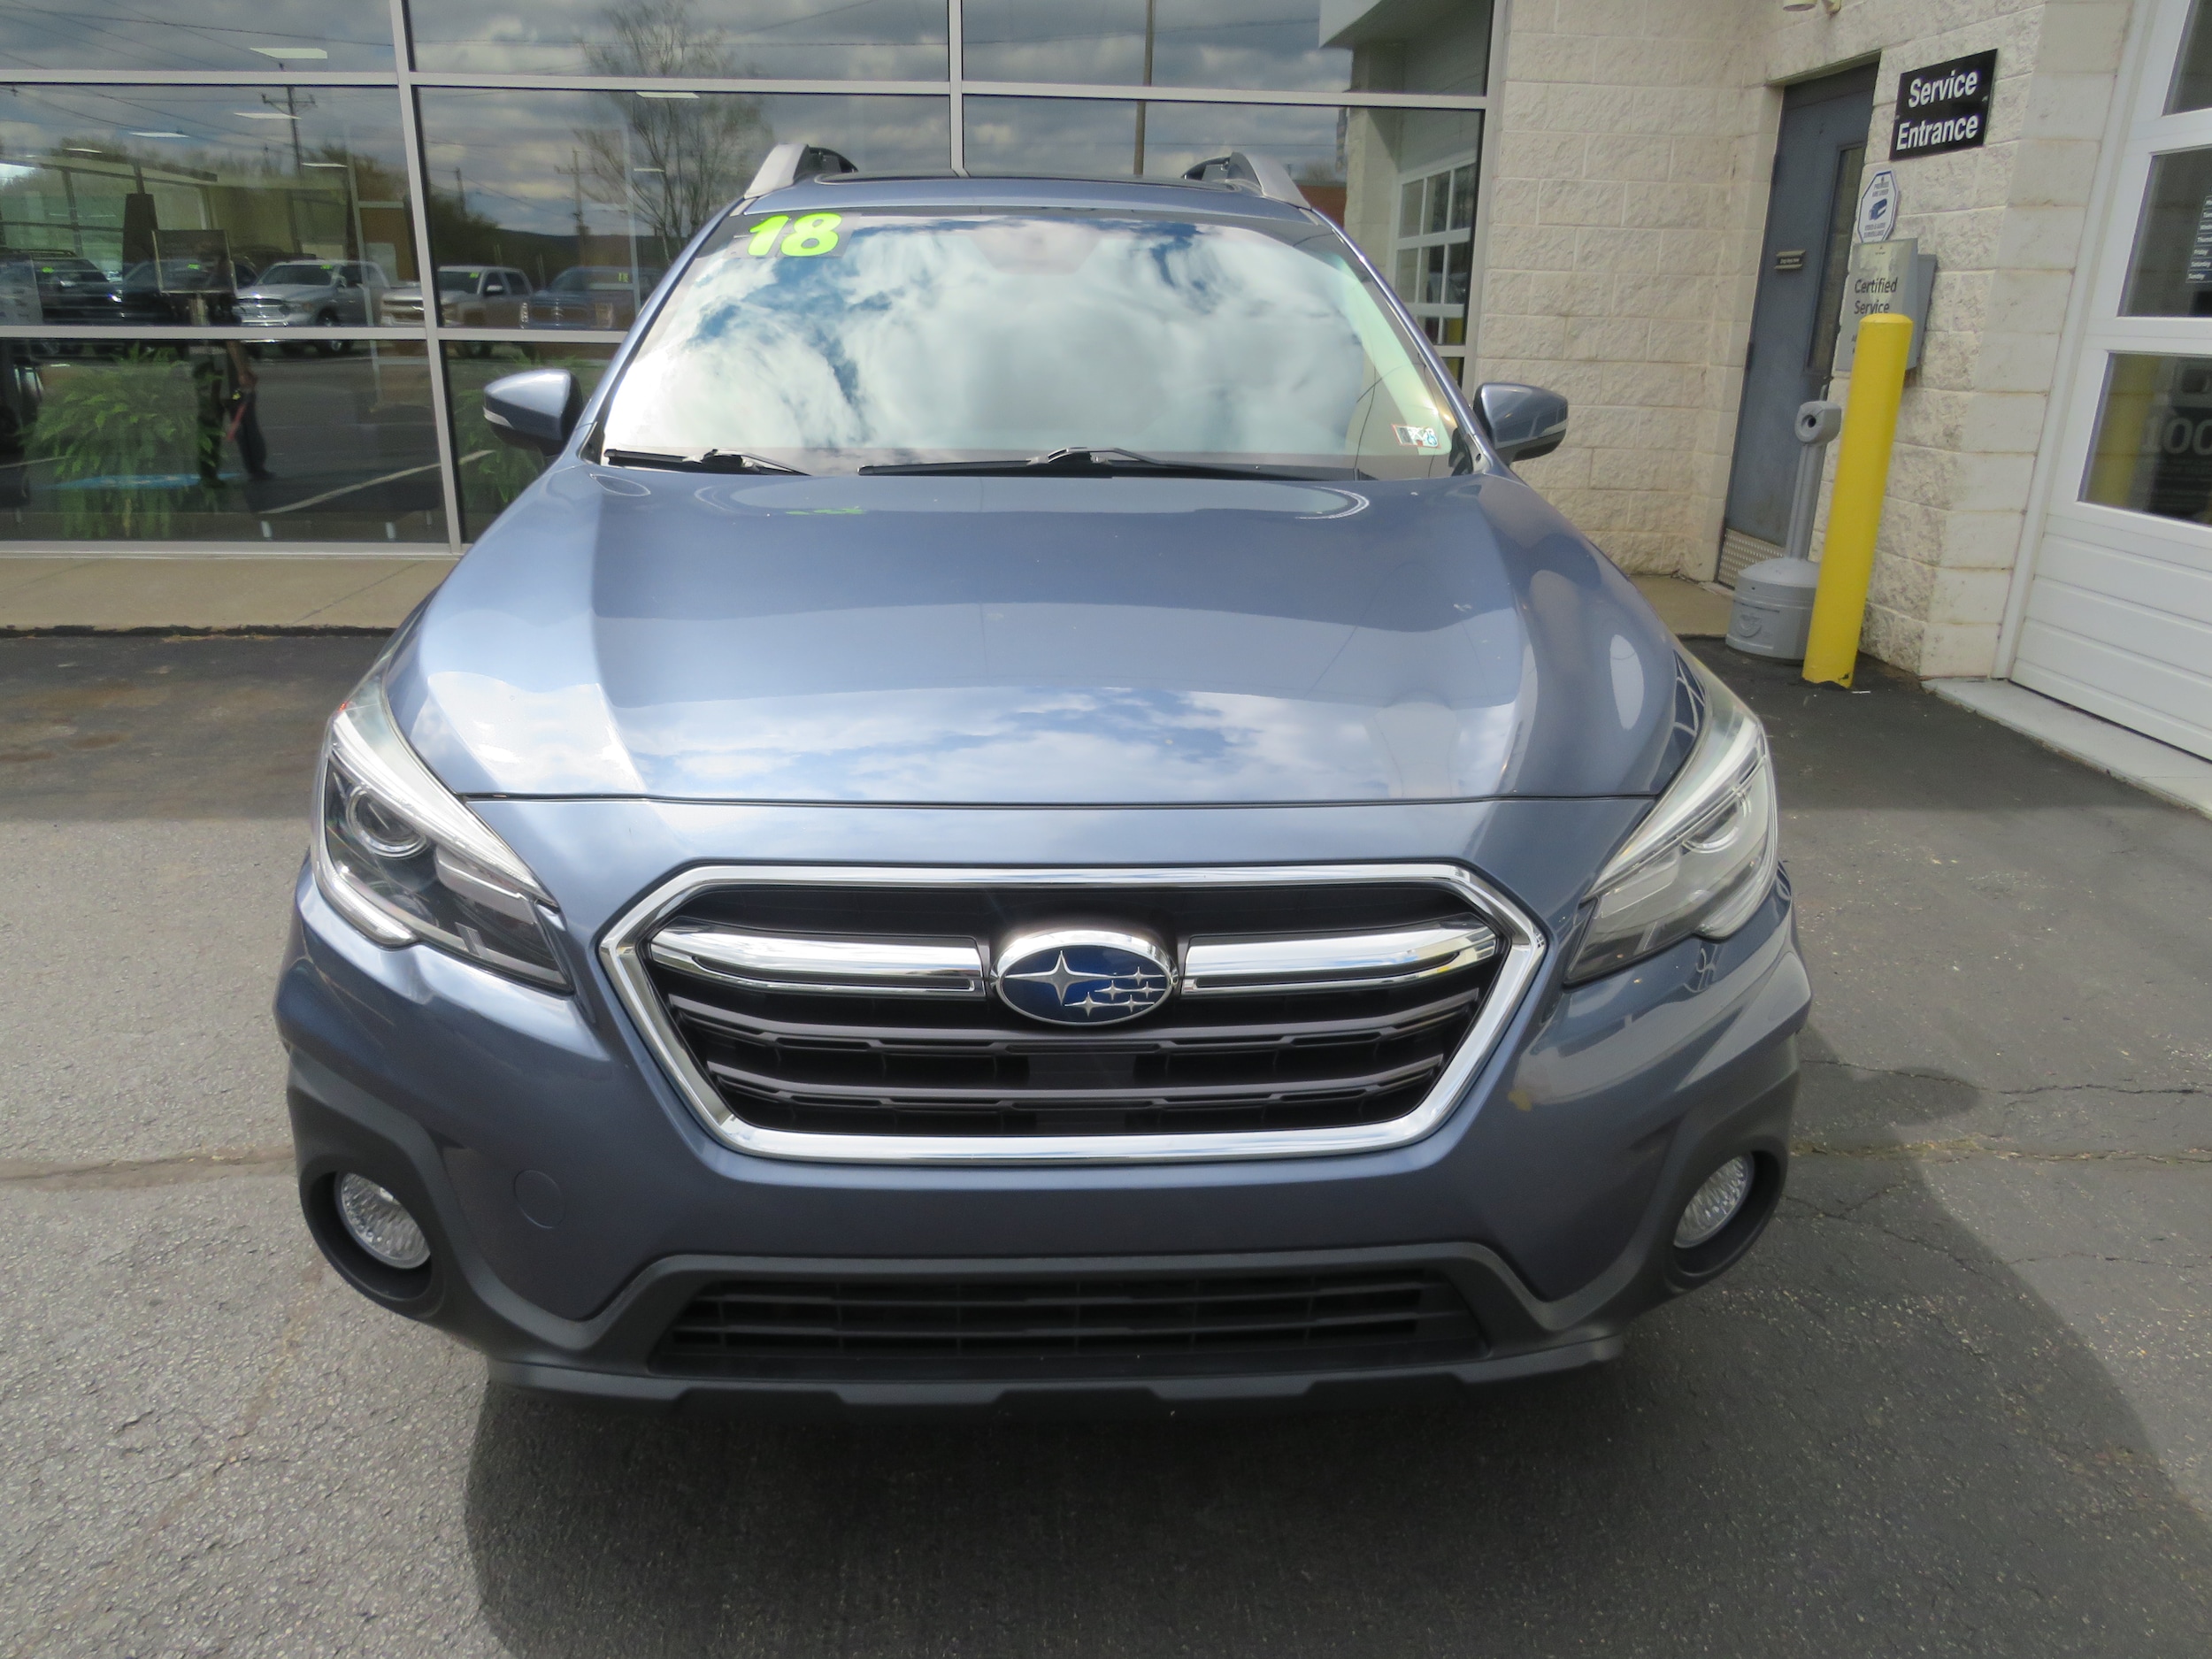 Used 2018 Subaru Outback Limited with VIN 4S4BSANC3J3253434 for sale in Oil City, PA